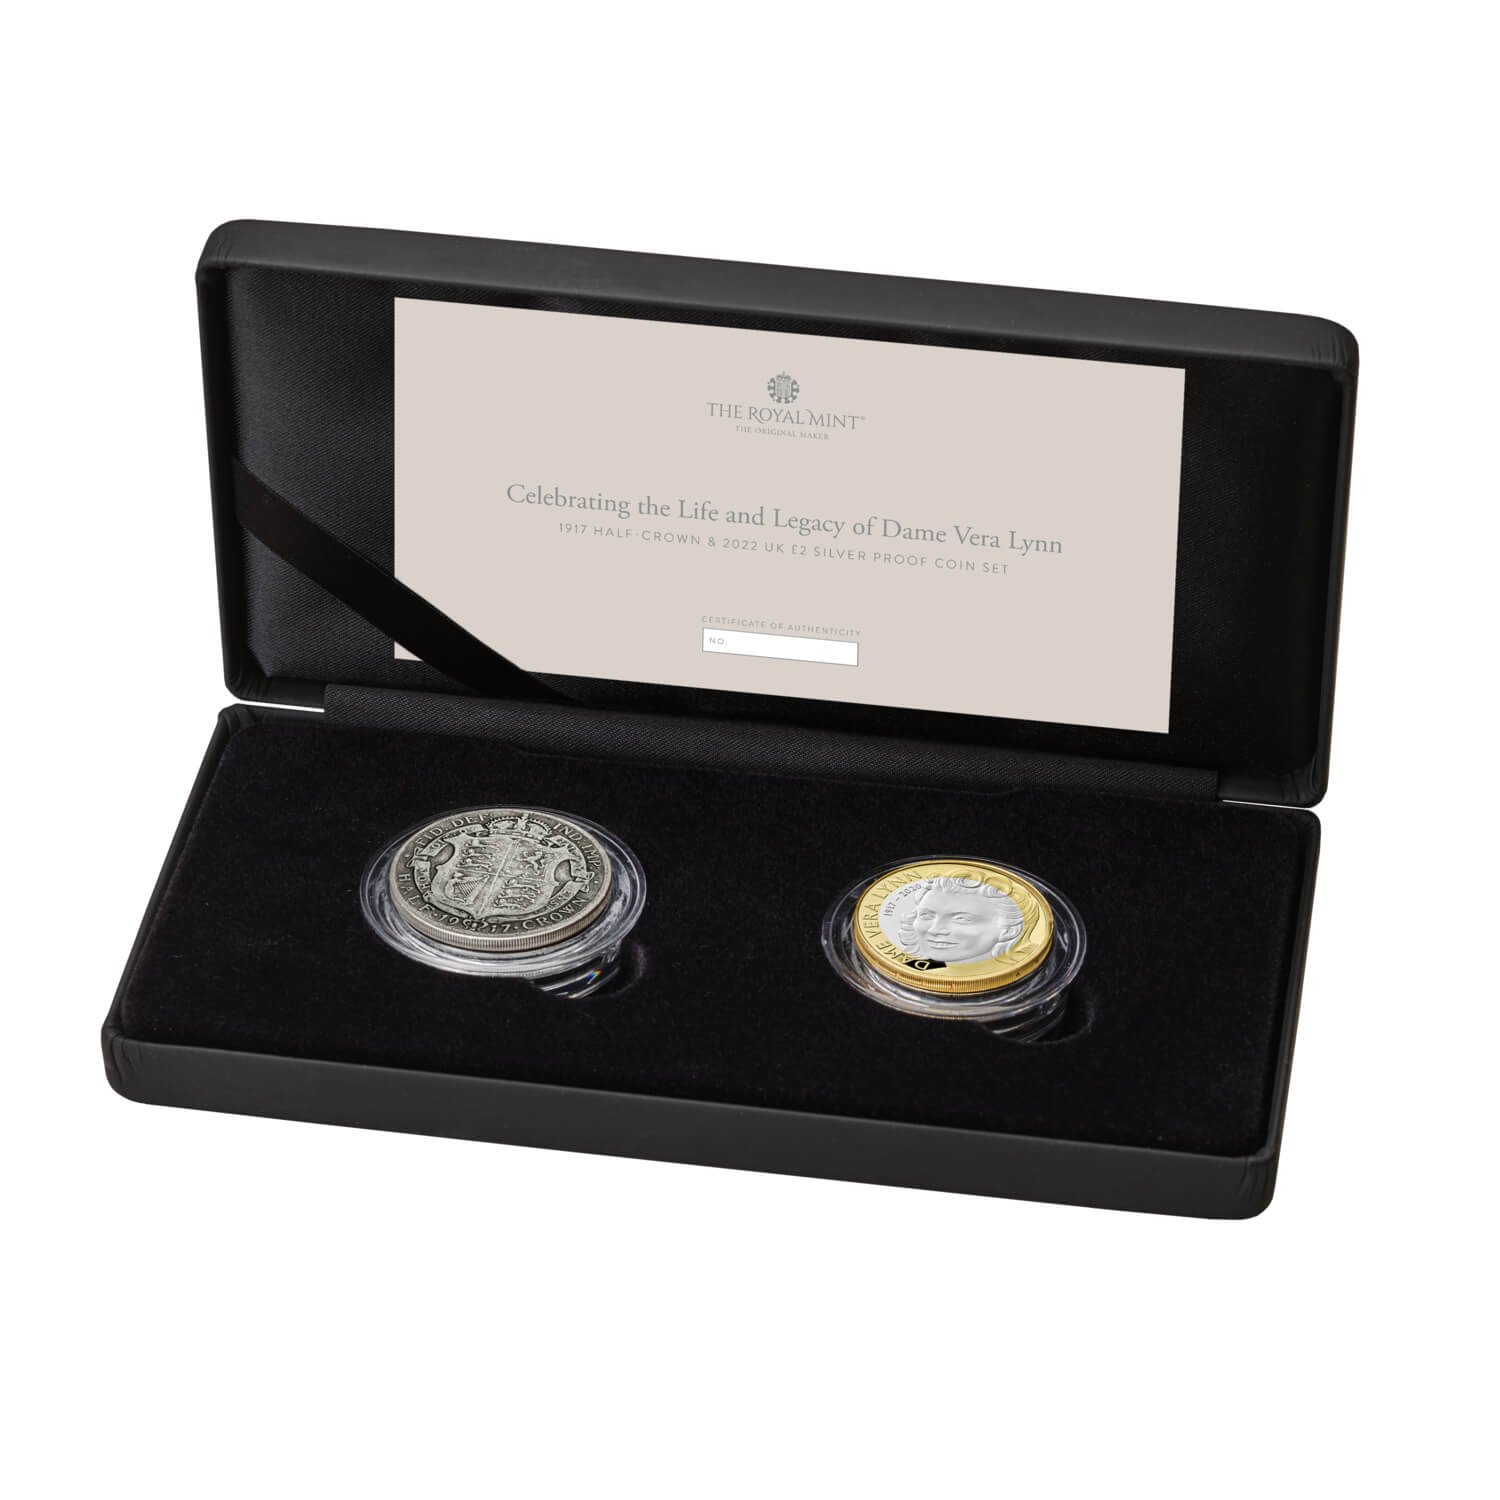 Dame Vera Lynn 1917 Half Crown and 2022 UK £2 Silver Proof